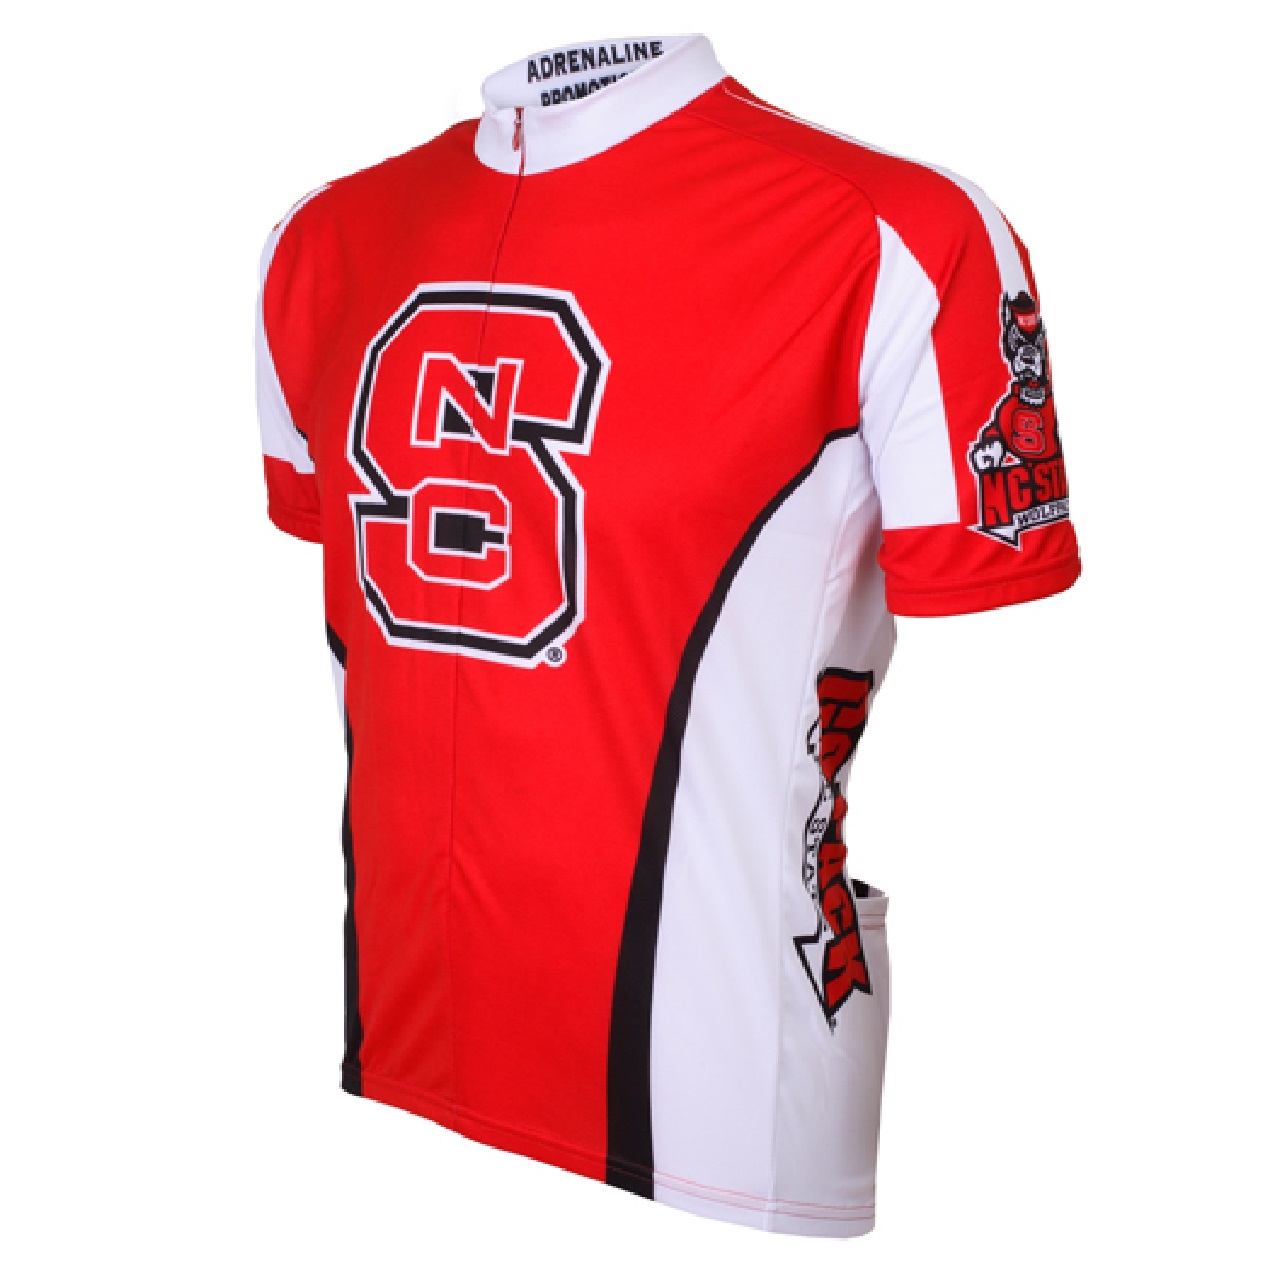 Adrenaline Promo NC State Wolfpack College  Road Cycling Jersey